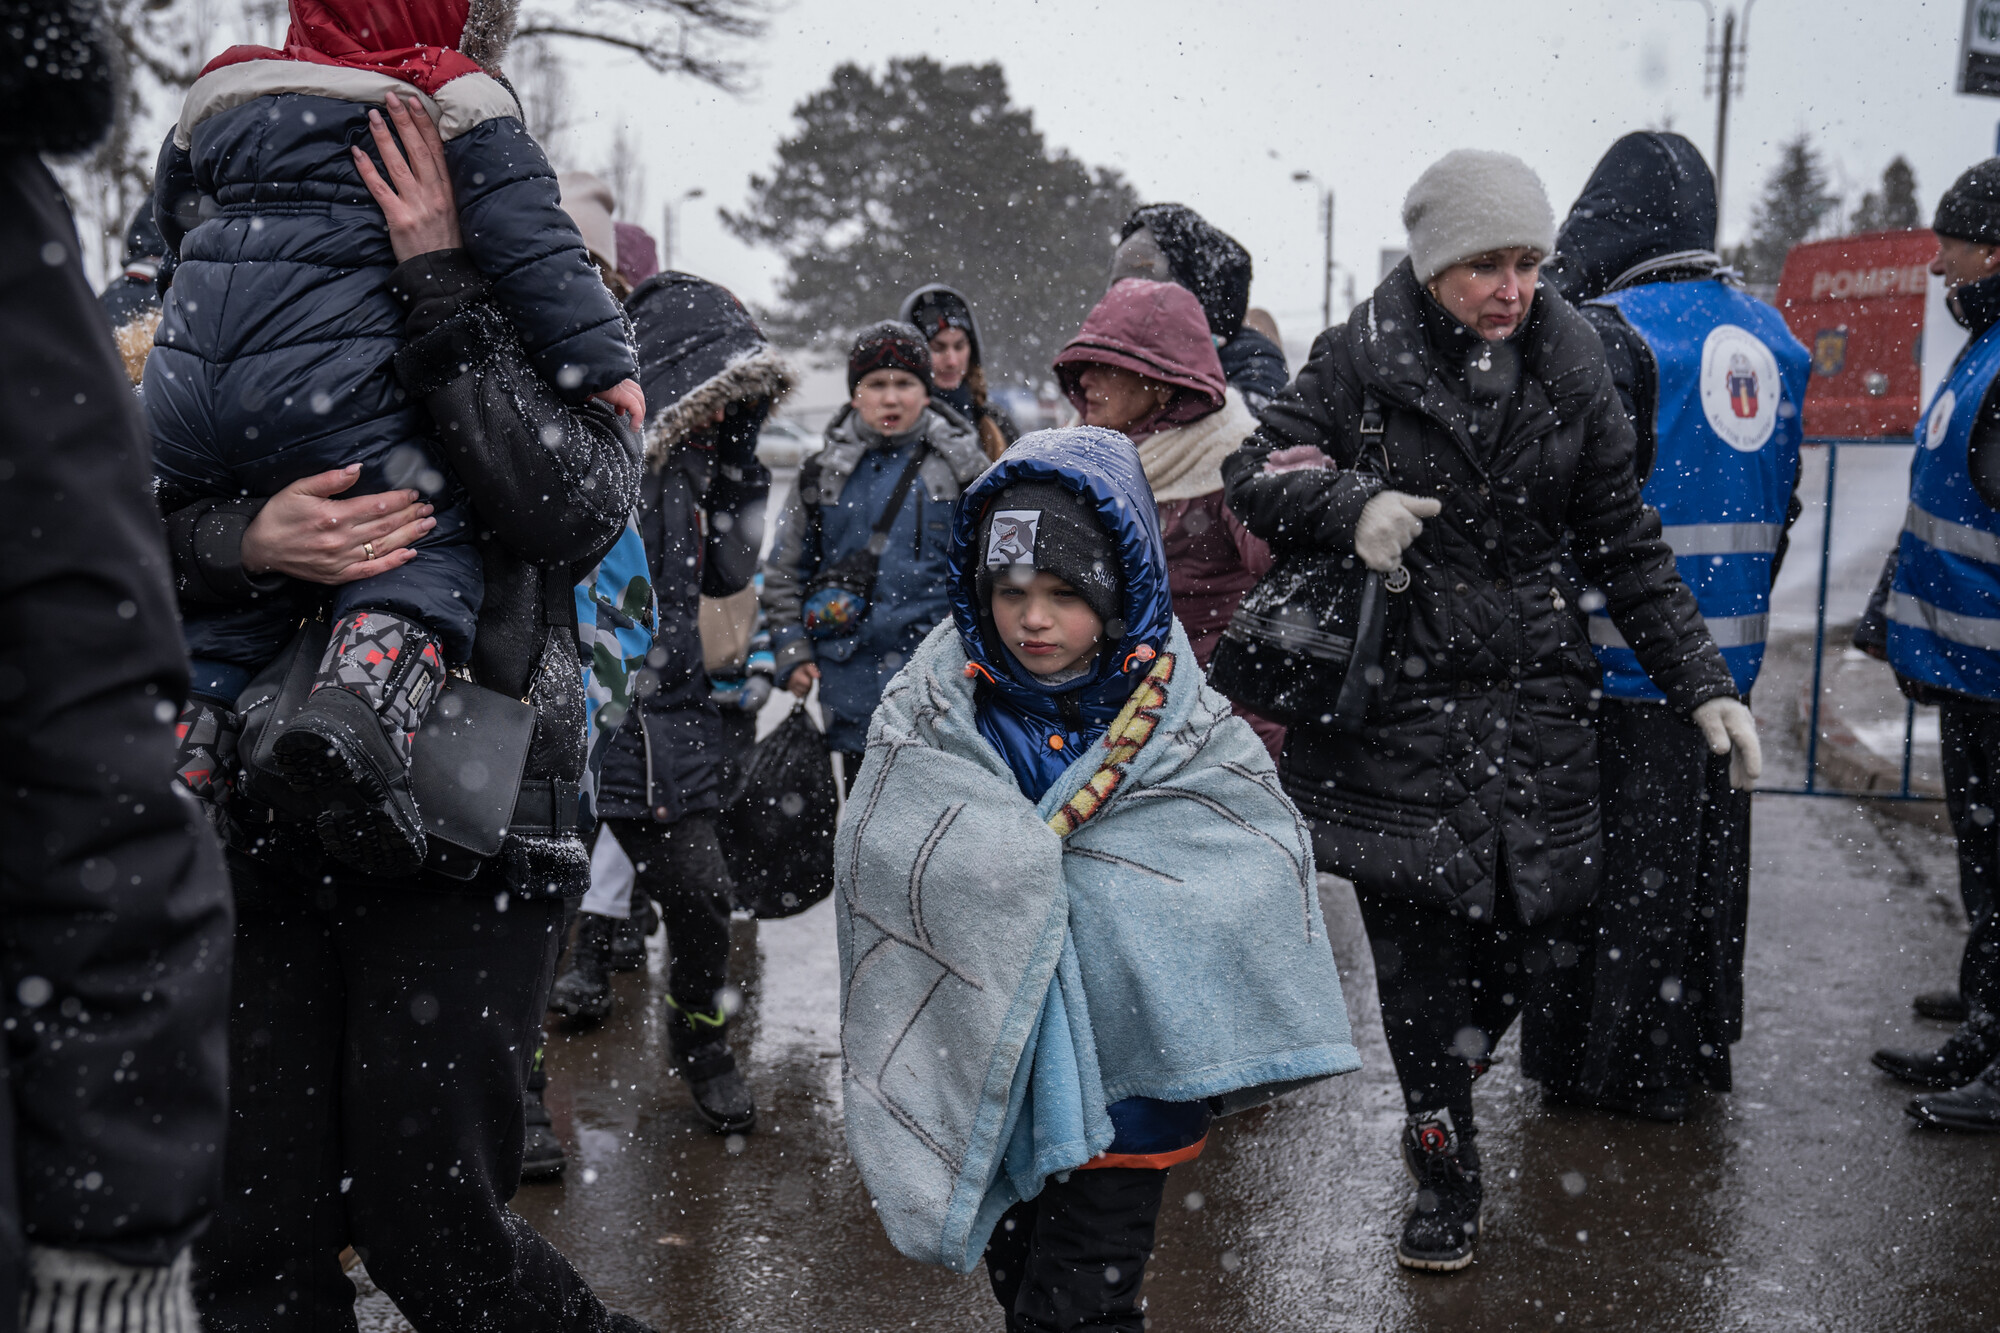 Refugees crossing the border from Romania to Ukraine in bitterly cold snowy weather